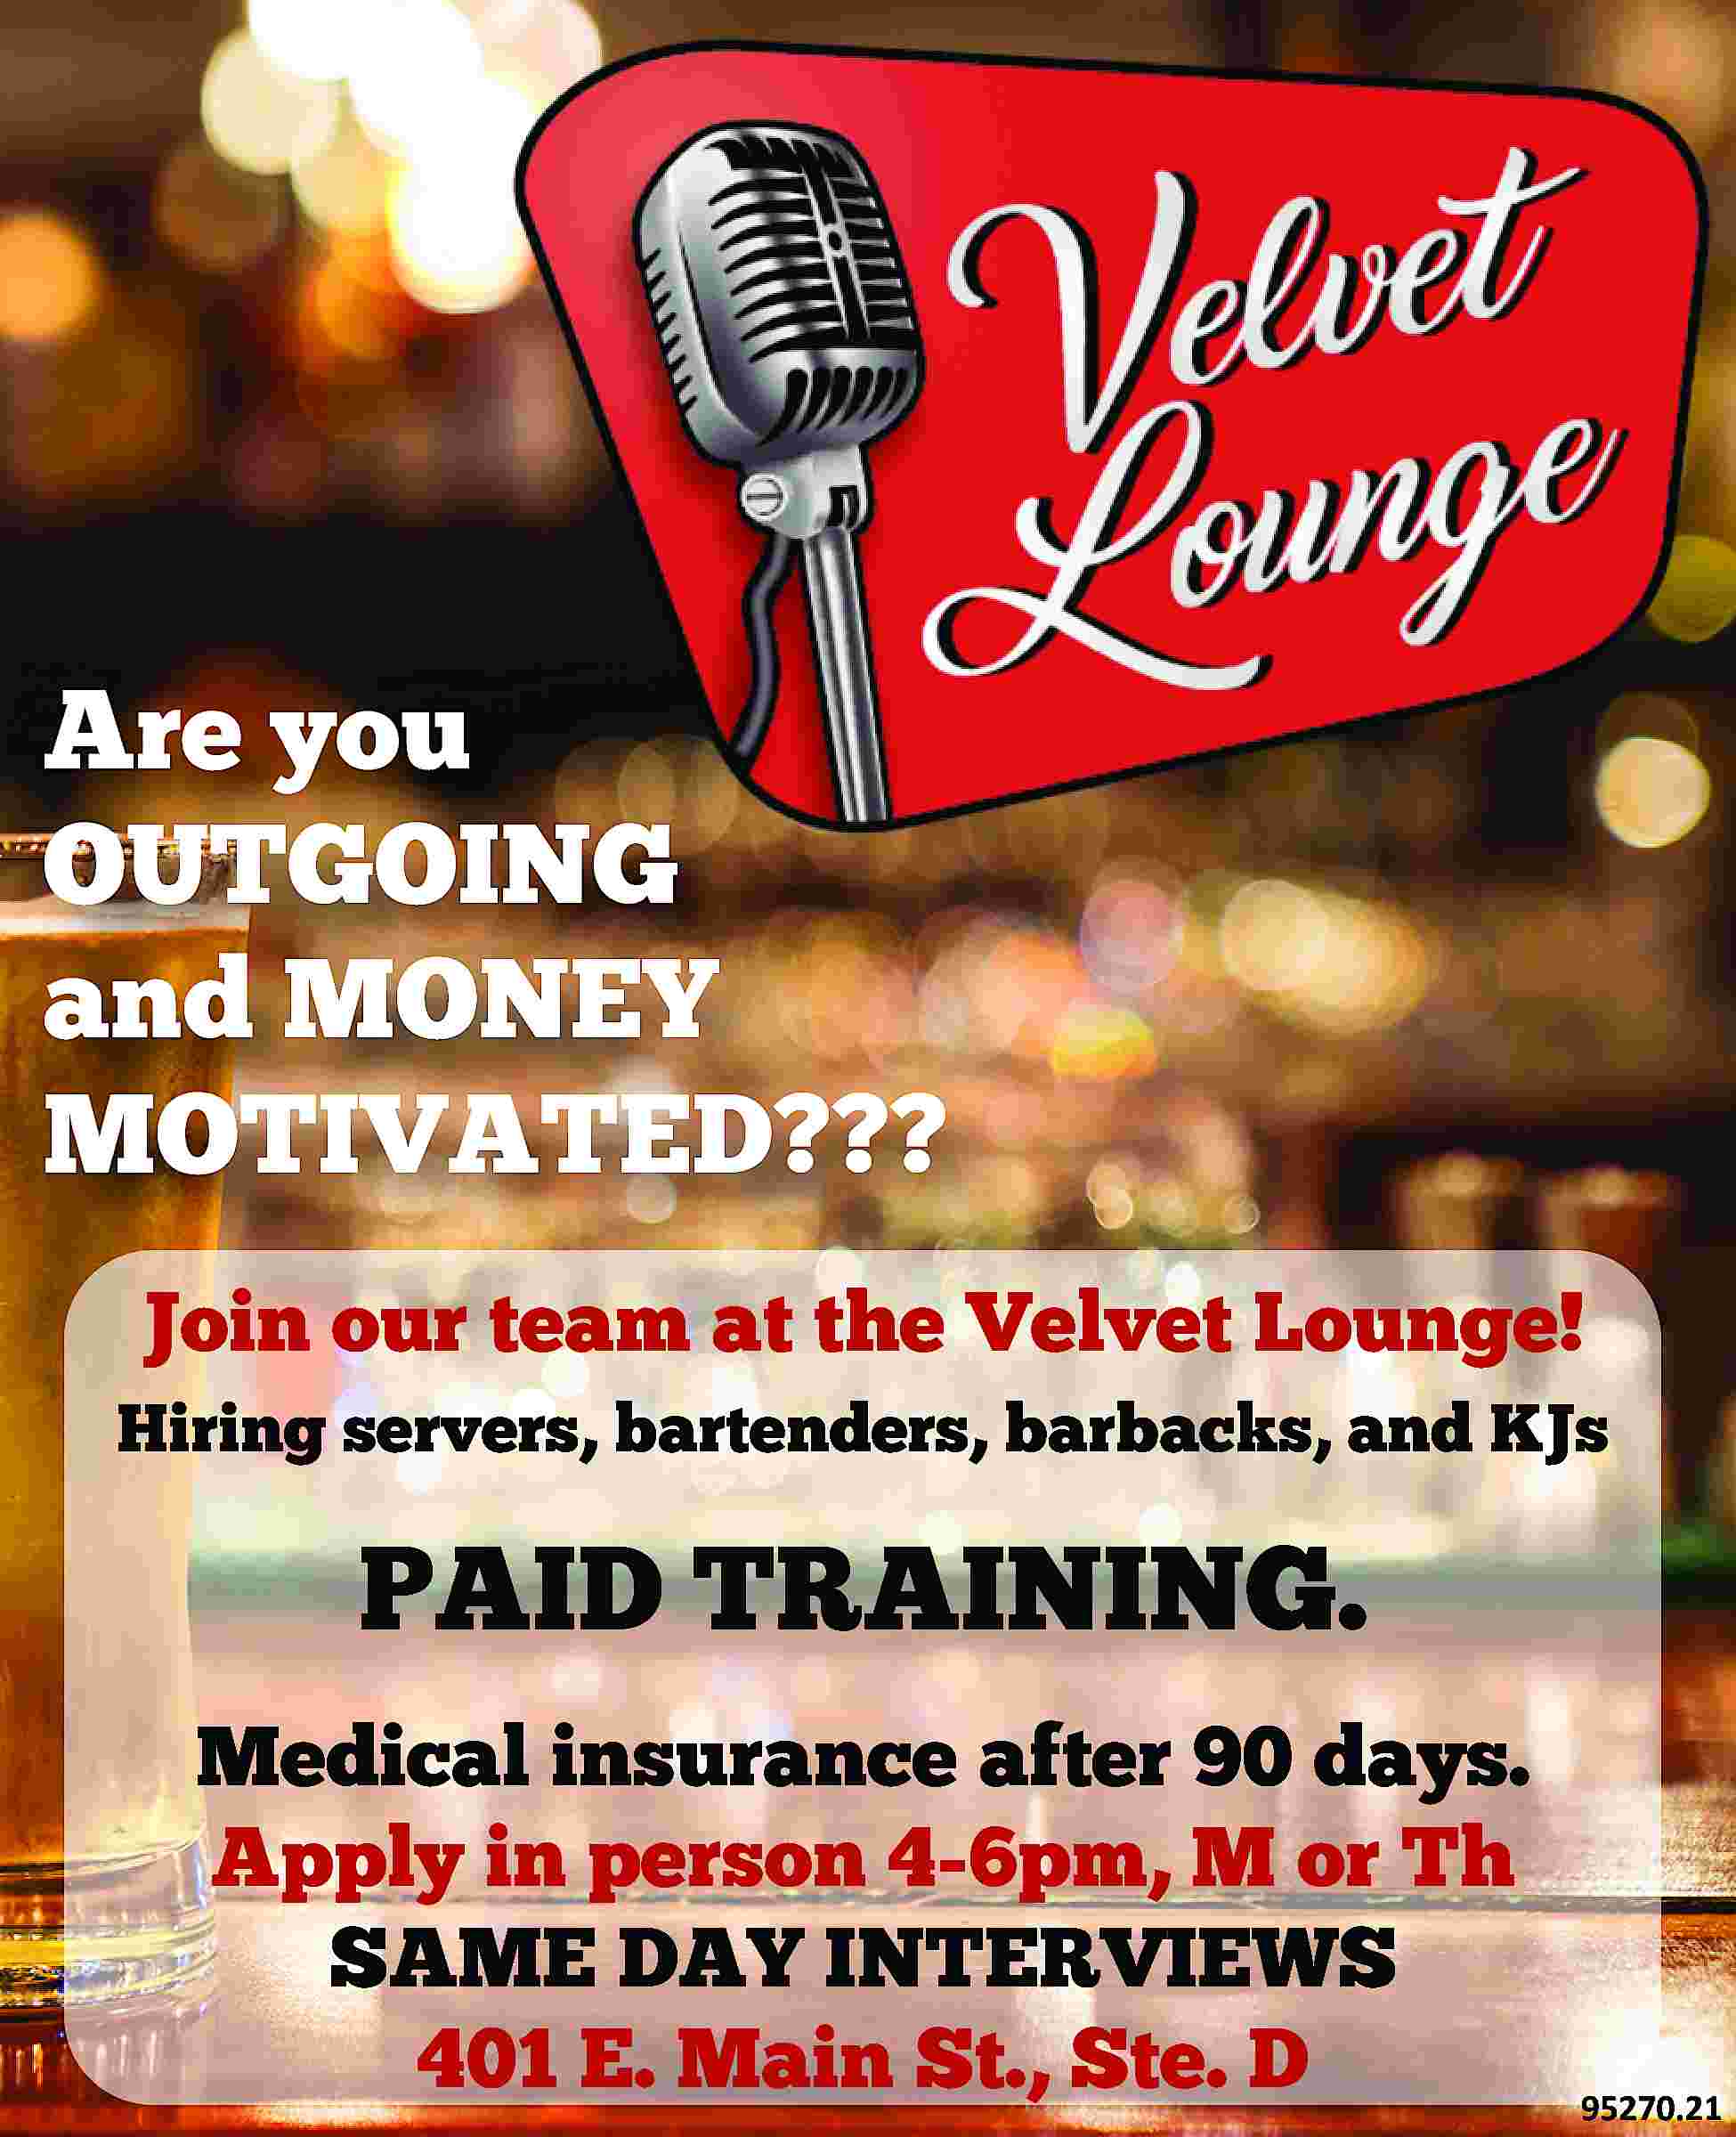 Are you OUTGOING and MONEY  Are you OUTGOING and MONEY MOTIVATED??? Join our team at the Velvet Lounge! Hiring servers, bartenders, barbacks, and KJs PAID TRAINING. Medical insurance after 90 days. Apply in person 4-6pm, M or Th SAME DAY INTERVIEWS 401 E. Main St., Ste. D 95270.21